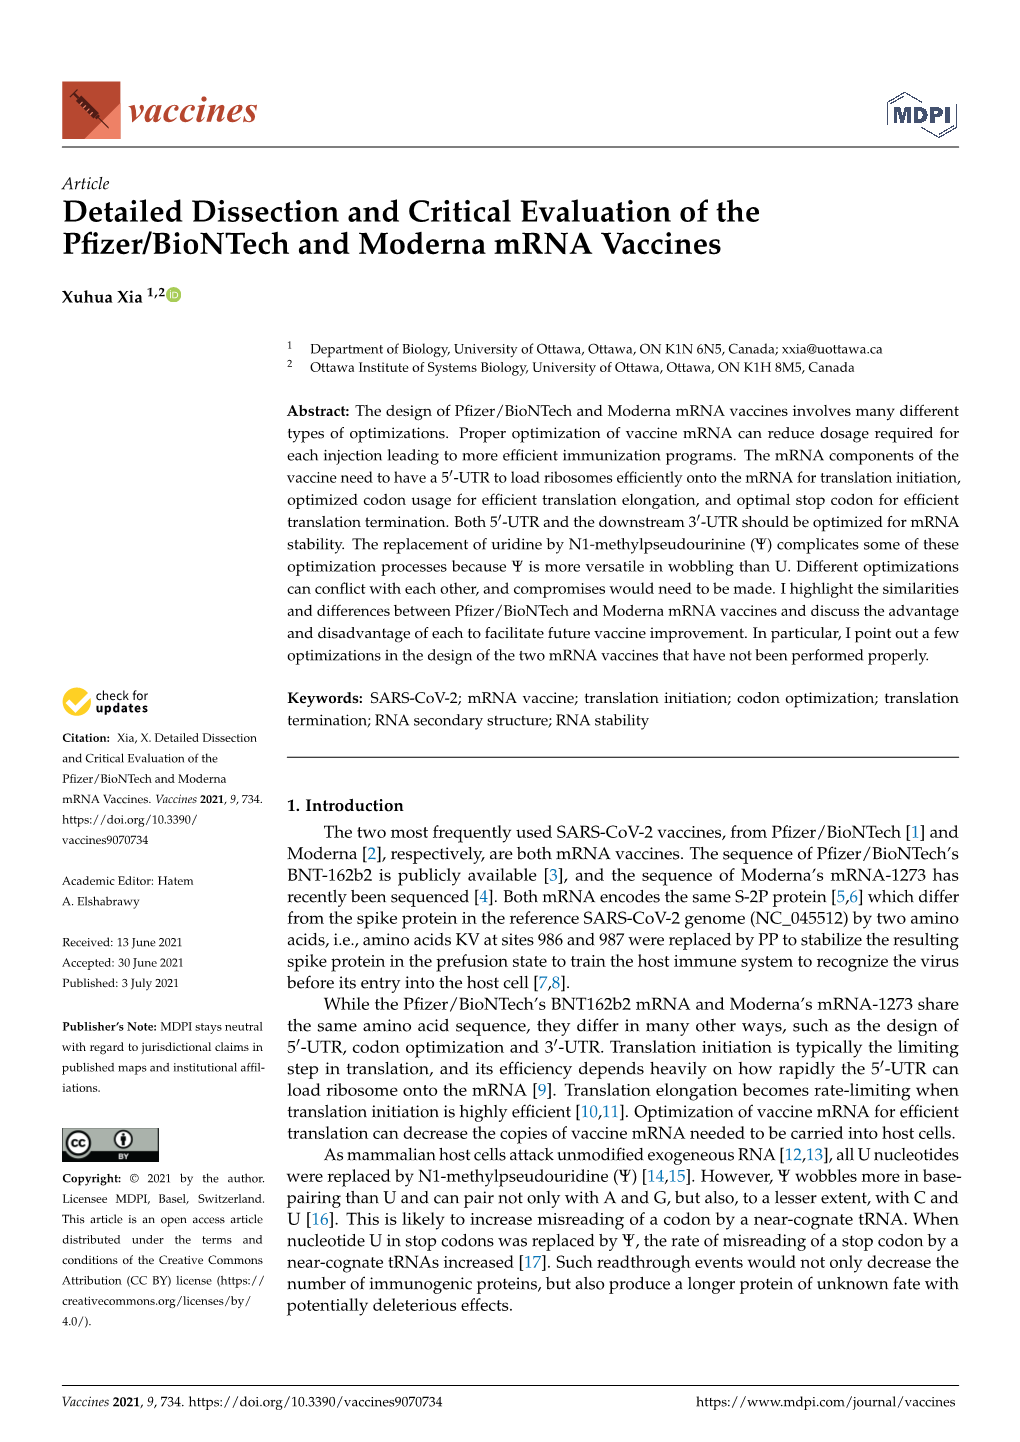 Detailed Dissection and Critical Evaluation of the Pfizer/Biontech